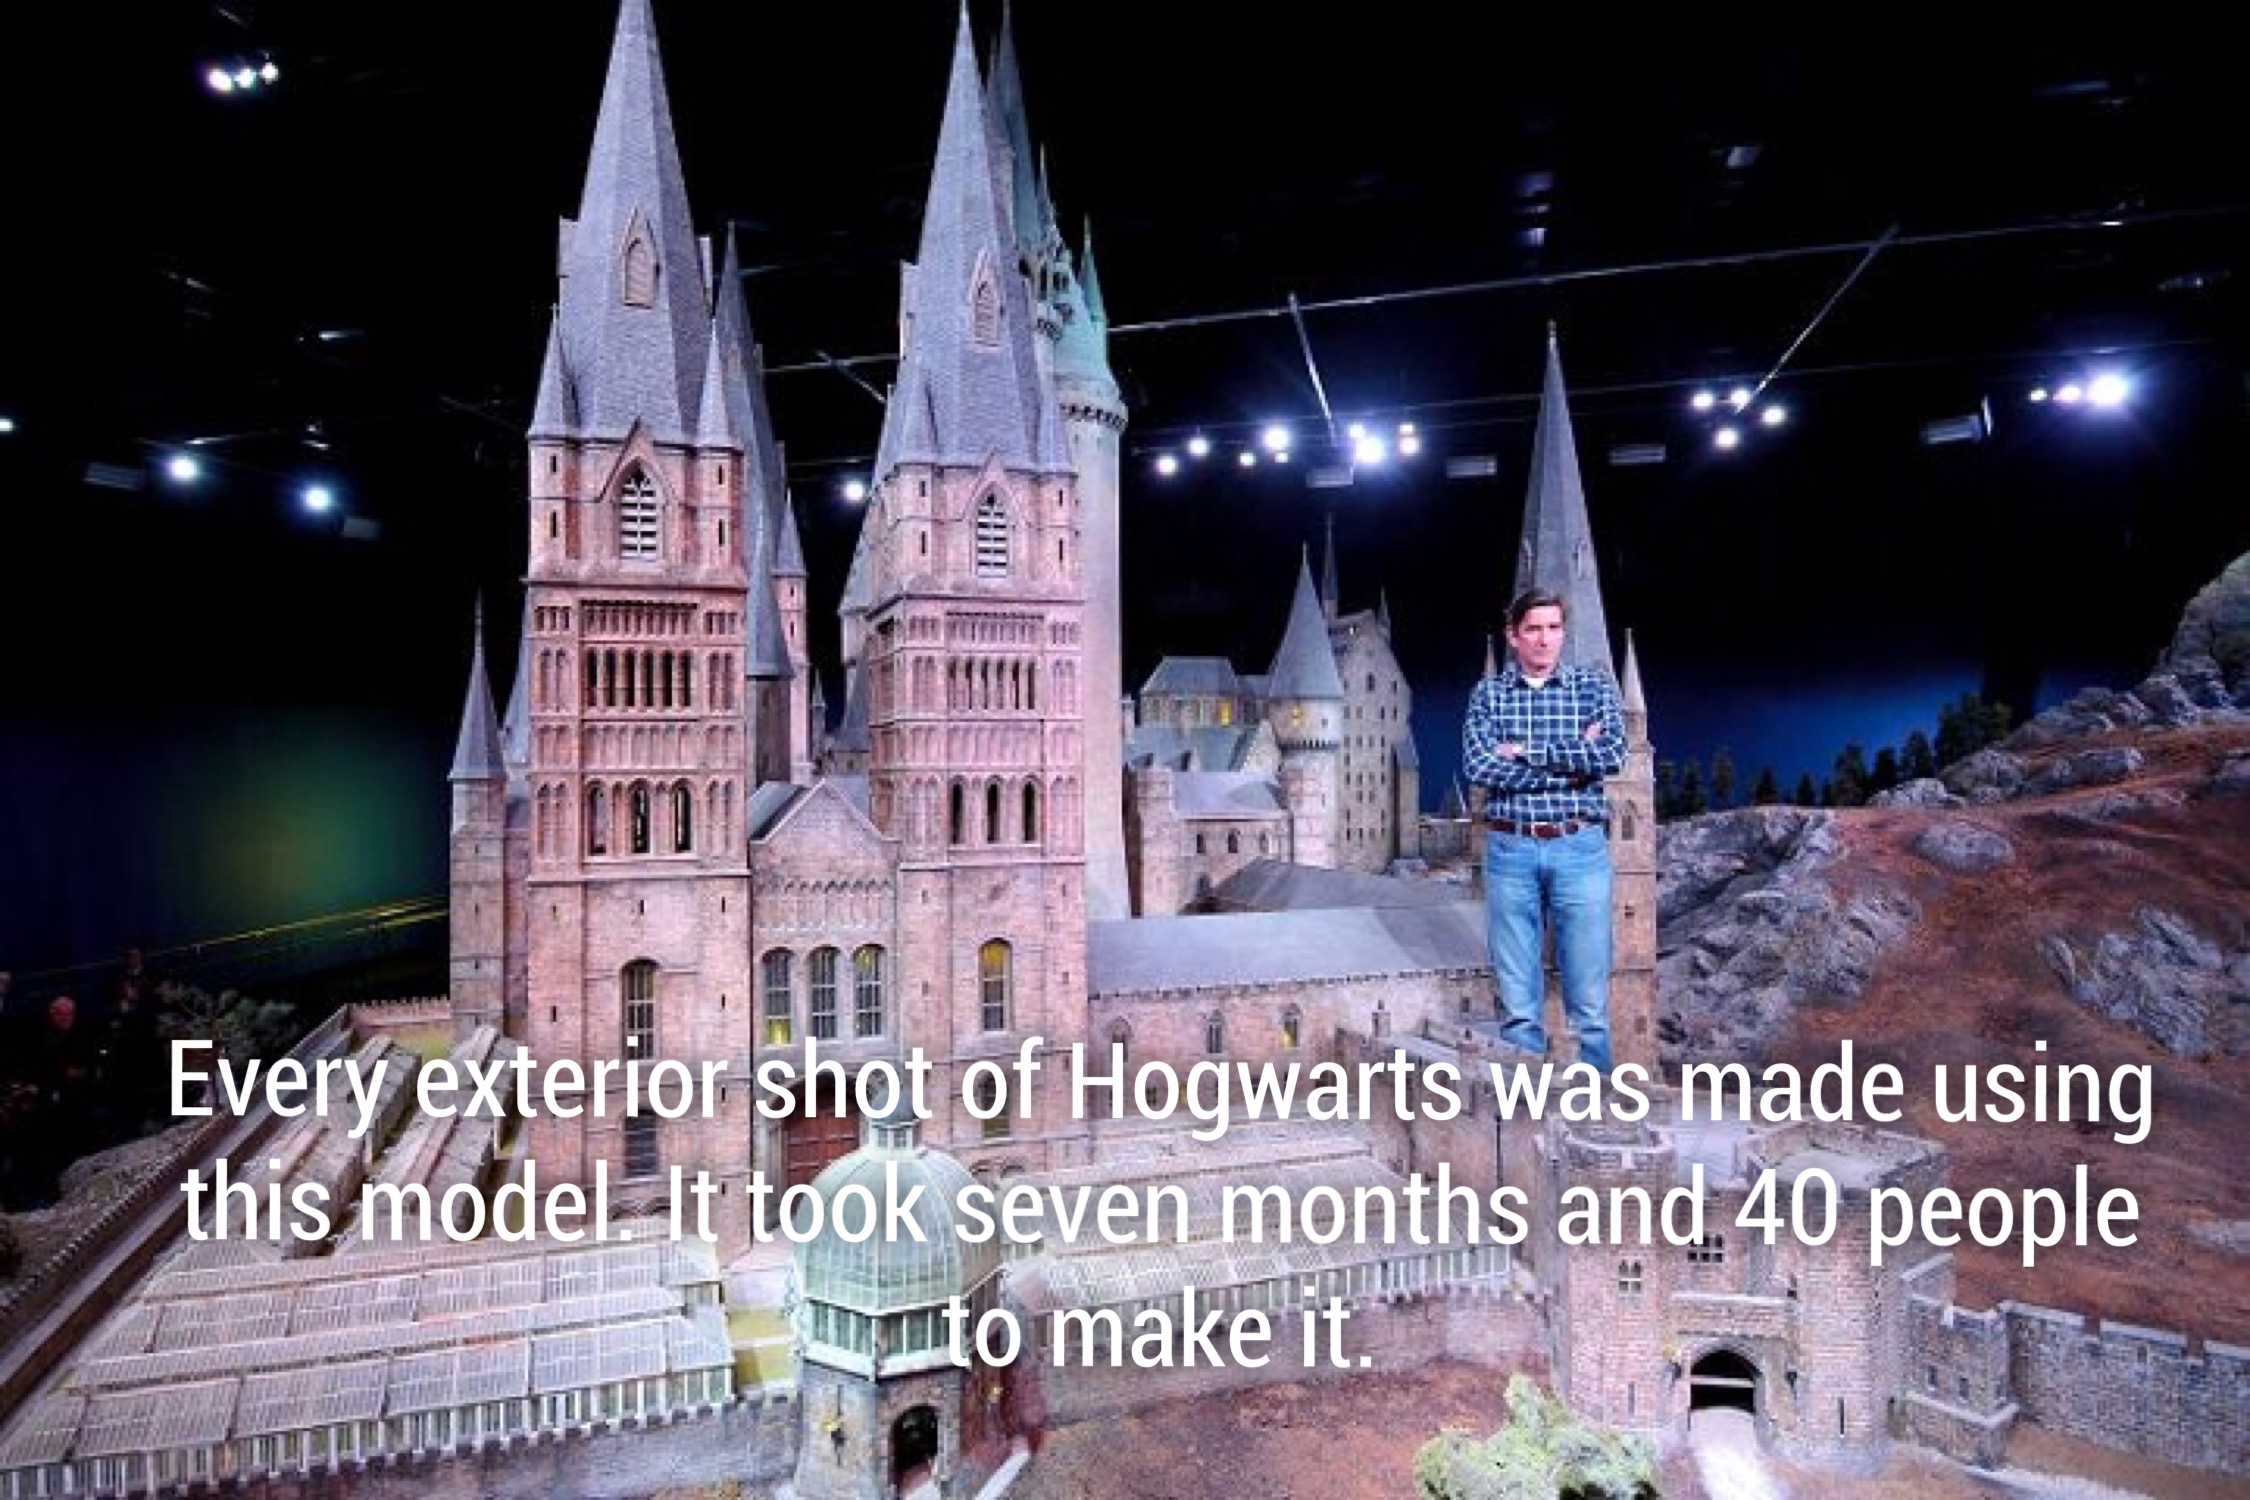 harry potter literary series - Itt M It Every exterior shot of Hogwarts was made using this model. It took seven months and 40 people mento make it.